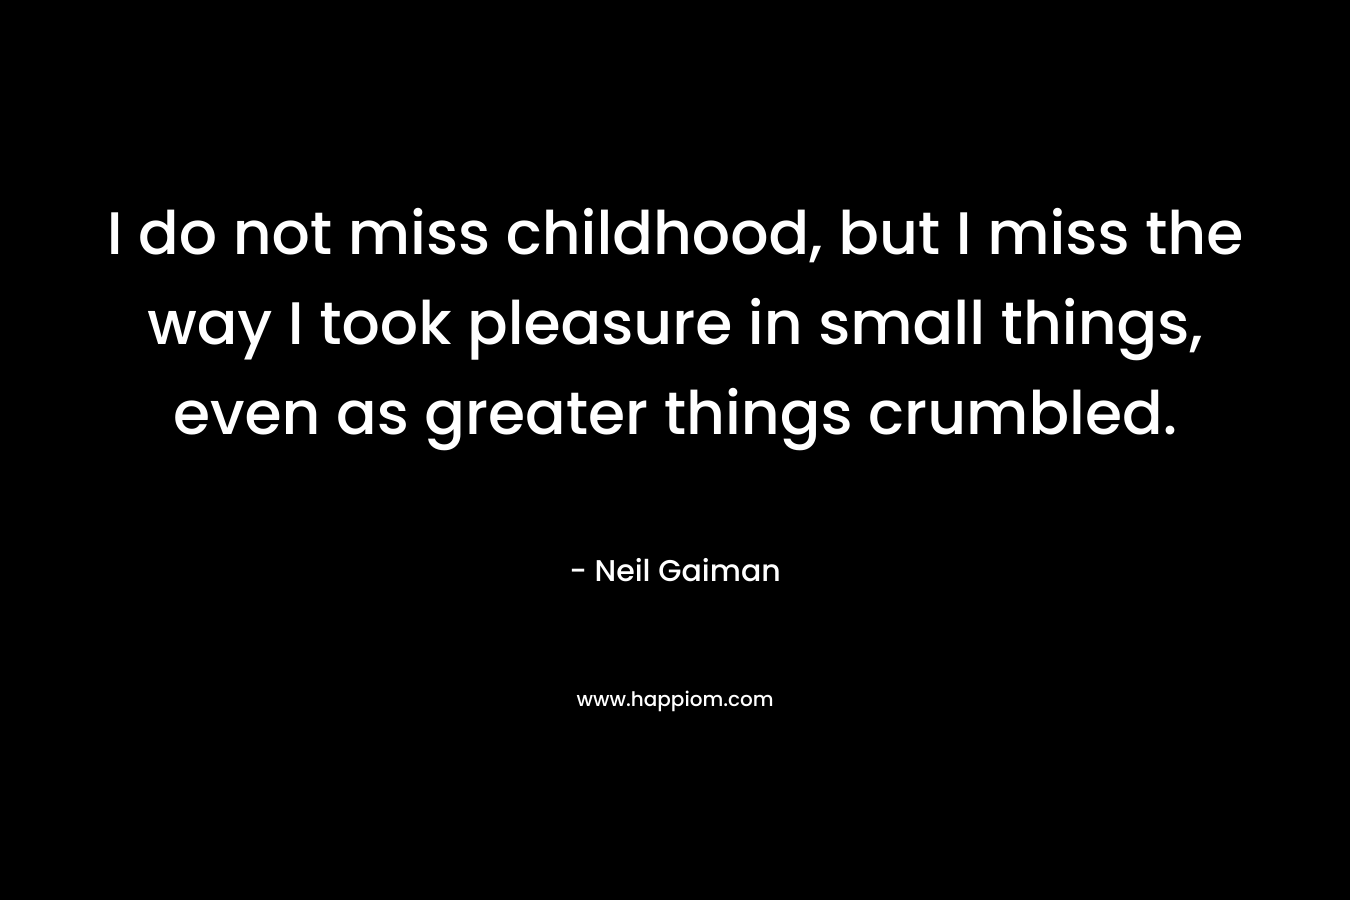 I do not miss childhood, but I miss the way I took pleasure in small things, even as greater things crumbled.